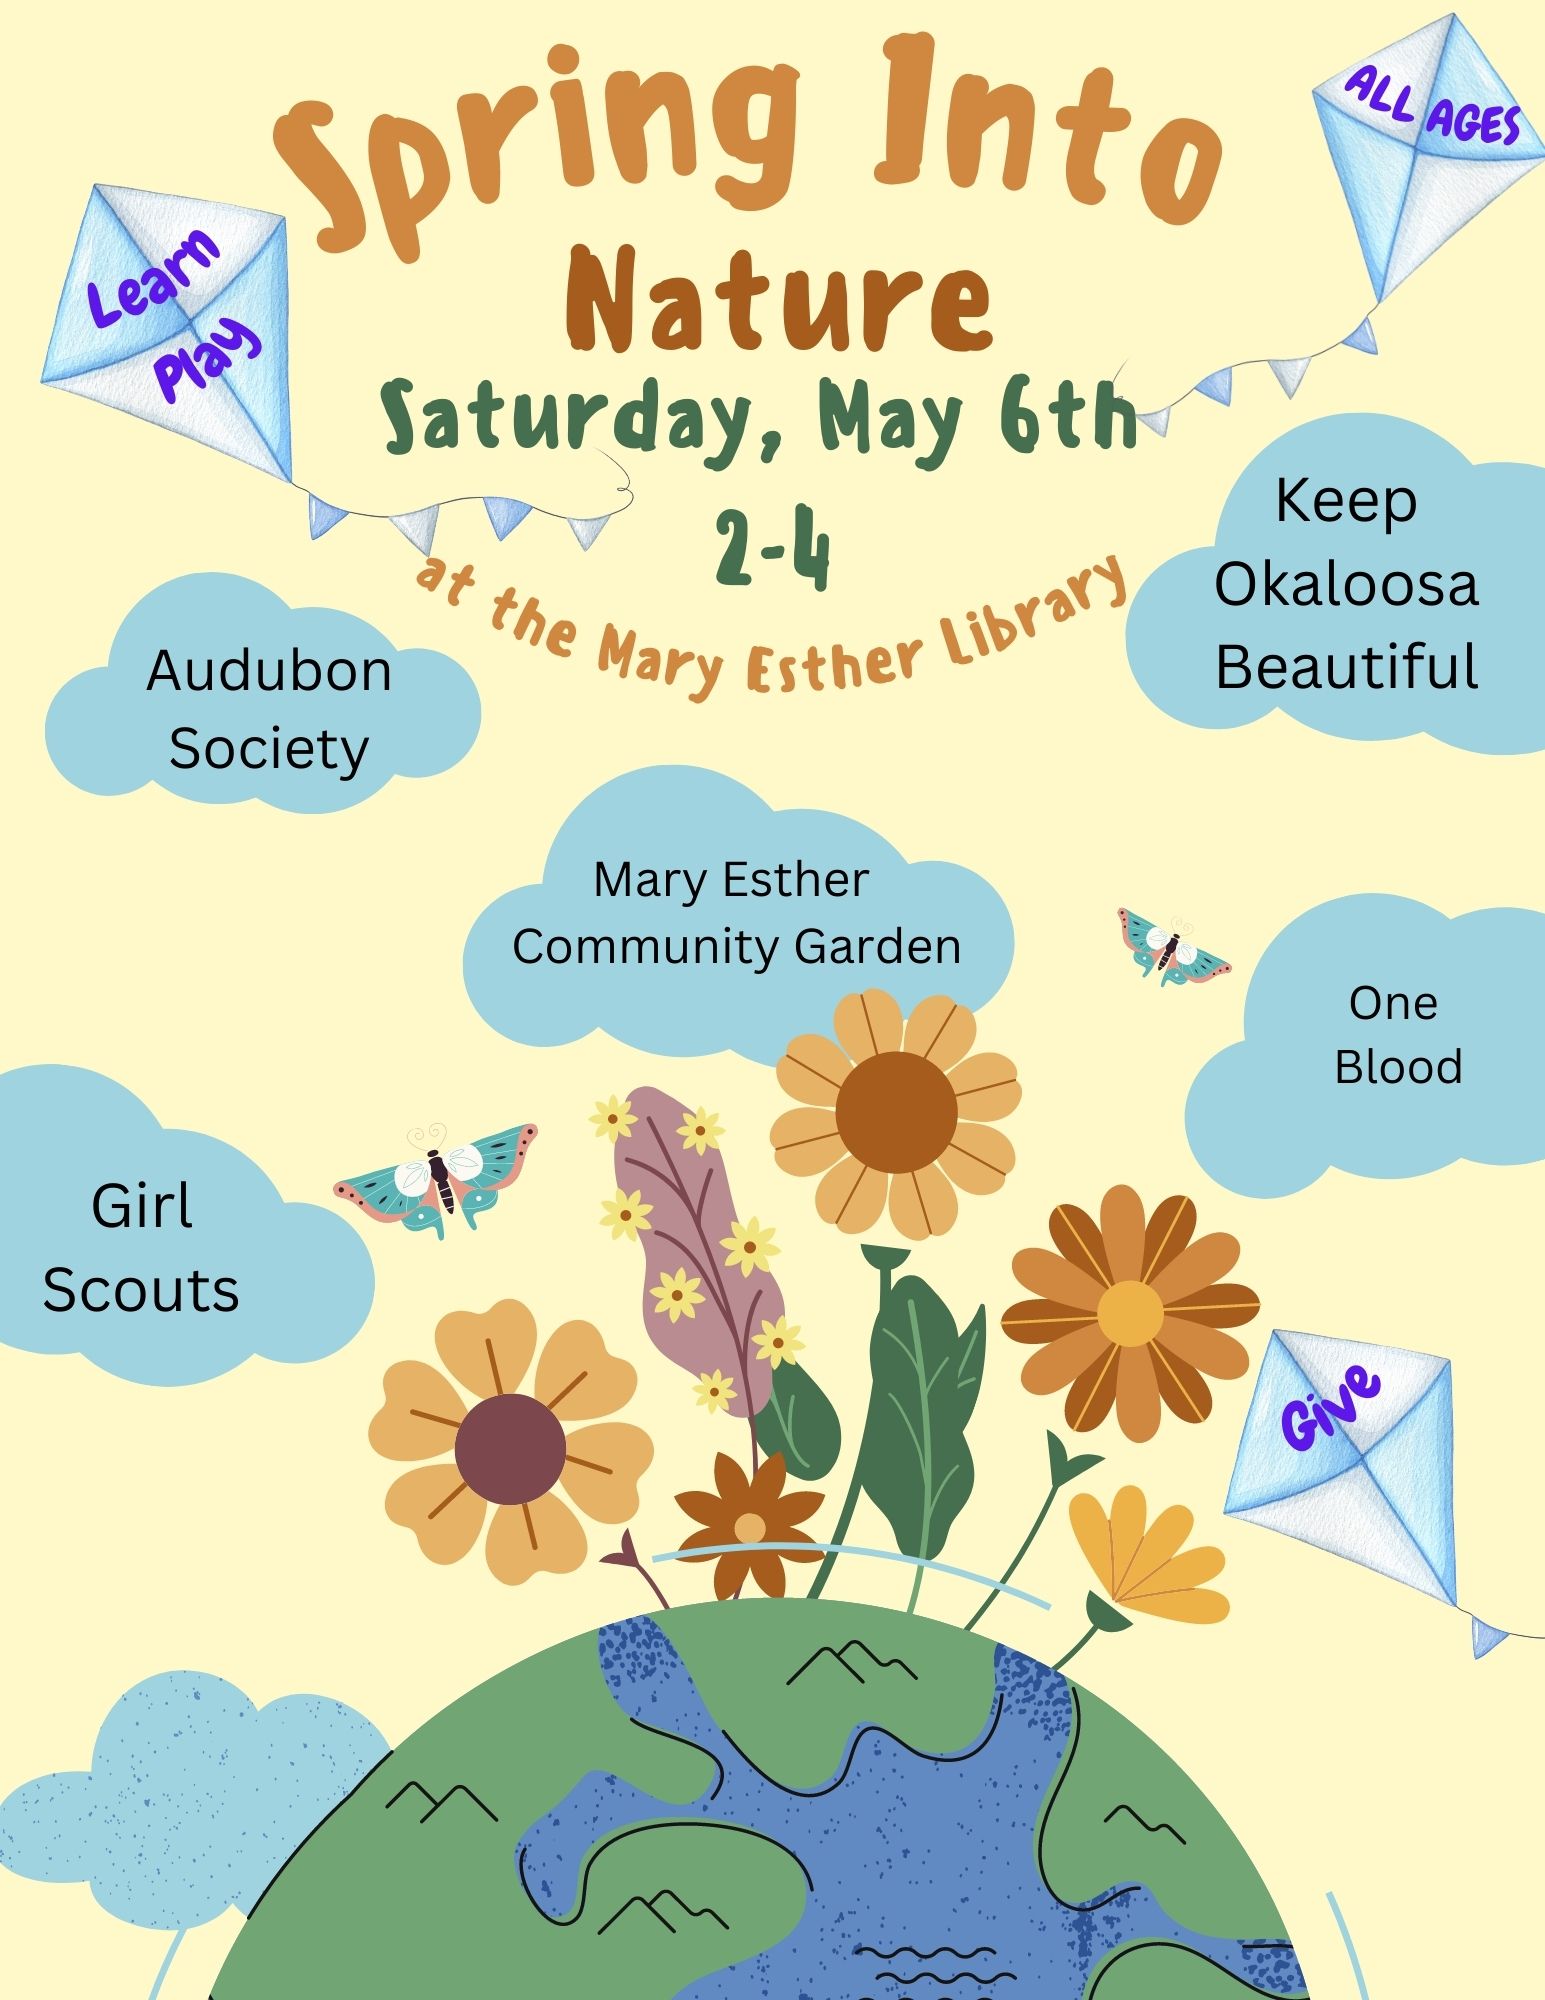 image of the earth with flowers growing out of the top that say spring into nature, clouds that have community partner names, and kites